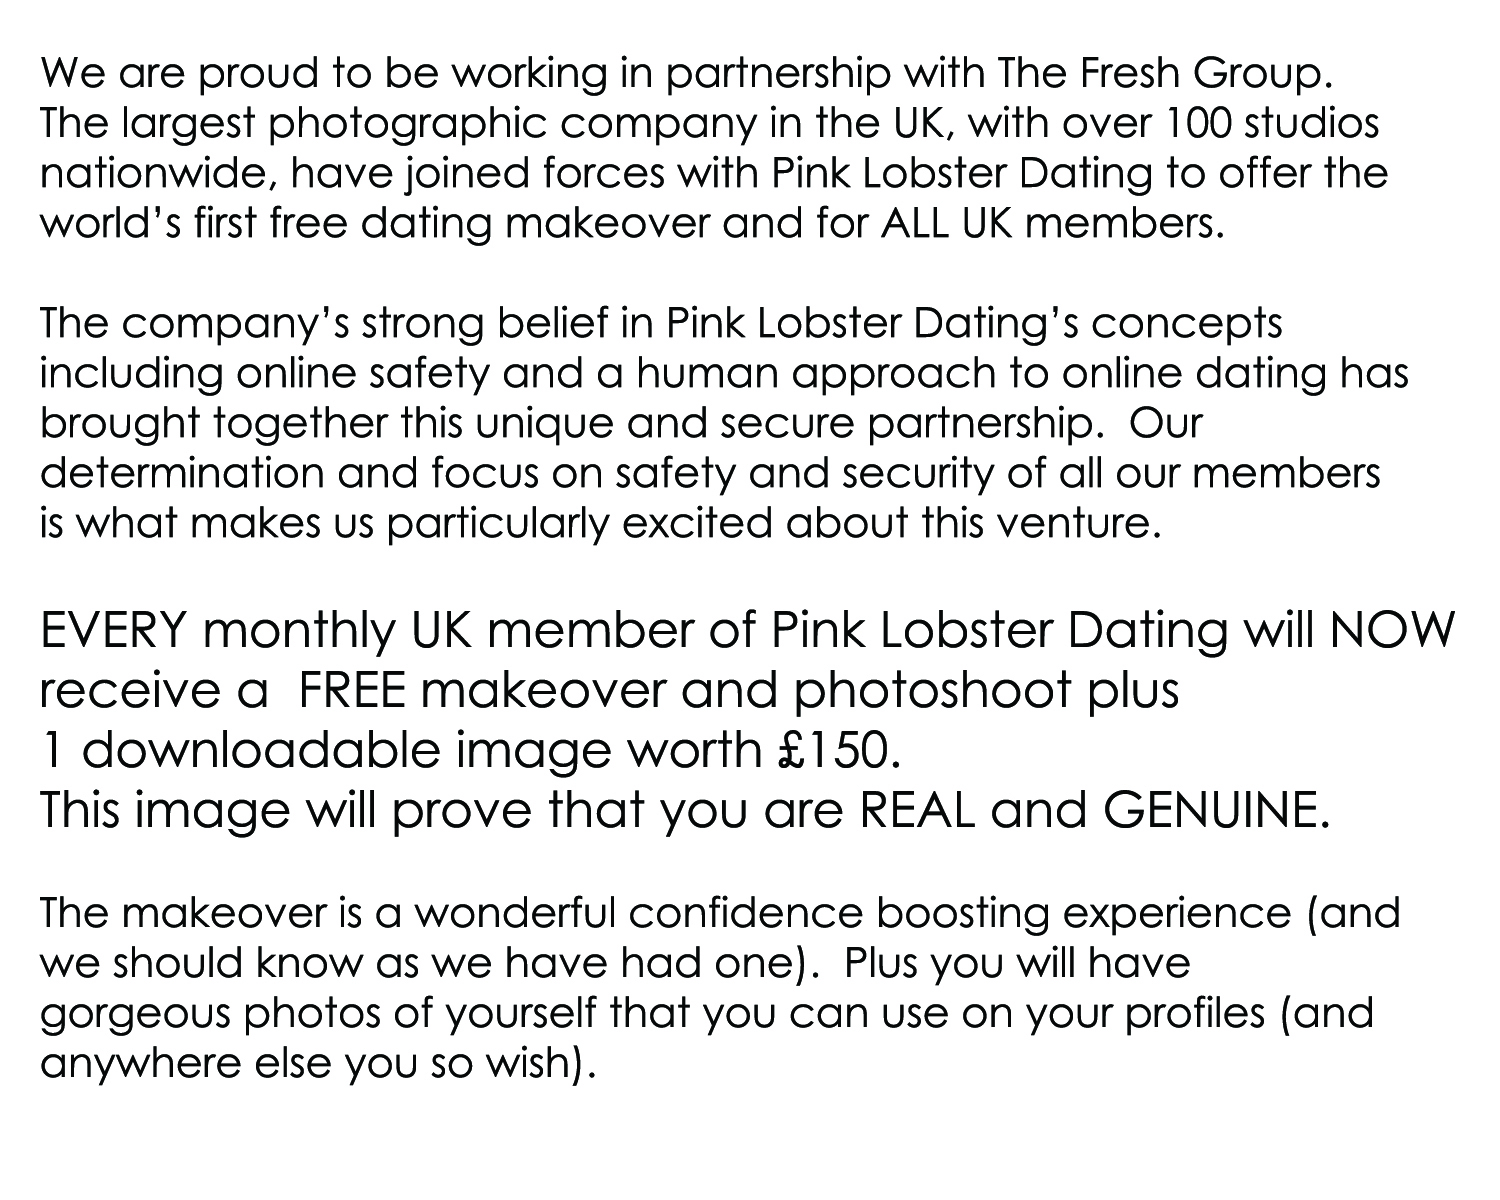 We are proud to be working in partnership with The Fresh Group.   The largest photographic company in the UK, with over 100 studios  nationwide, have joined forces with Pink Lobster Dating to offer the  world’s first free dating makeover and for ALL UK members.   The company’s strong belief in Pink Lobster Dating’s concepts  including online safety and a human approach to online dating has brought together this unique and secure partnership.  Our  determination and focus on safety and security of all our members  is what makes us particularly excited about this venture.  Every single UK member of Pink Lobster Dating will NOW  receive a  FREE makeover and photoshoot plus  1 downloadable image worth £150.  This image will prove that you are REAL and GENUINE.  The makeover is a wonderful confidence boosting experience (and we should know as we have all had one).  Plus you will have  gorgeous photos of yourself that you can use on your profiles (and anywhere else you so wish). 